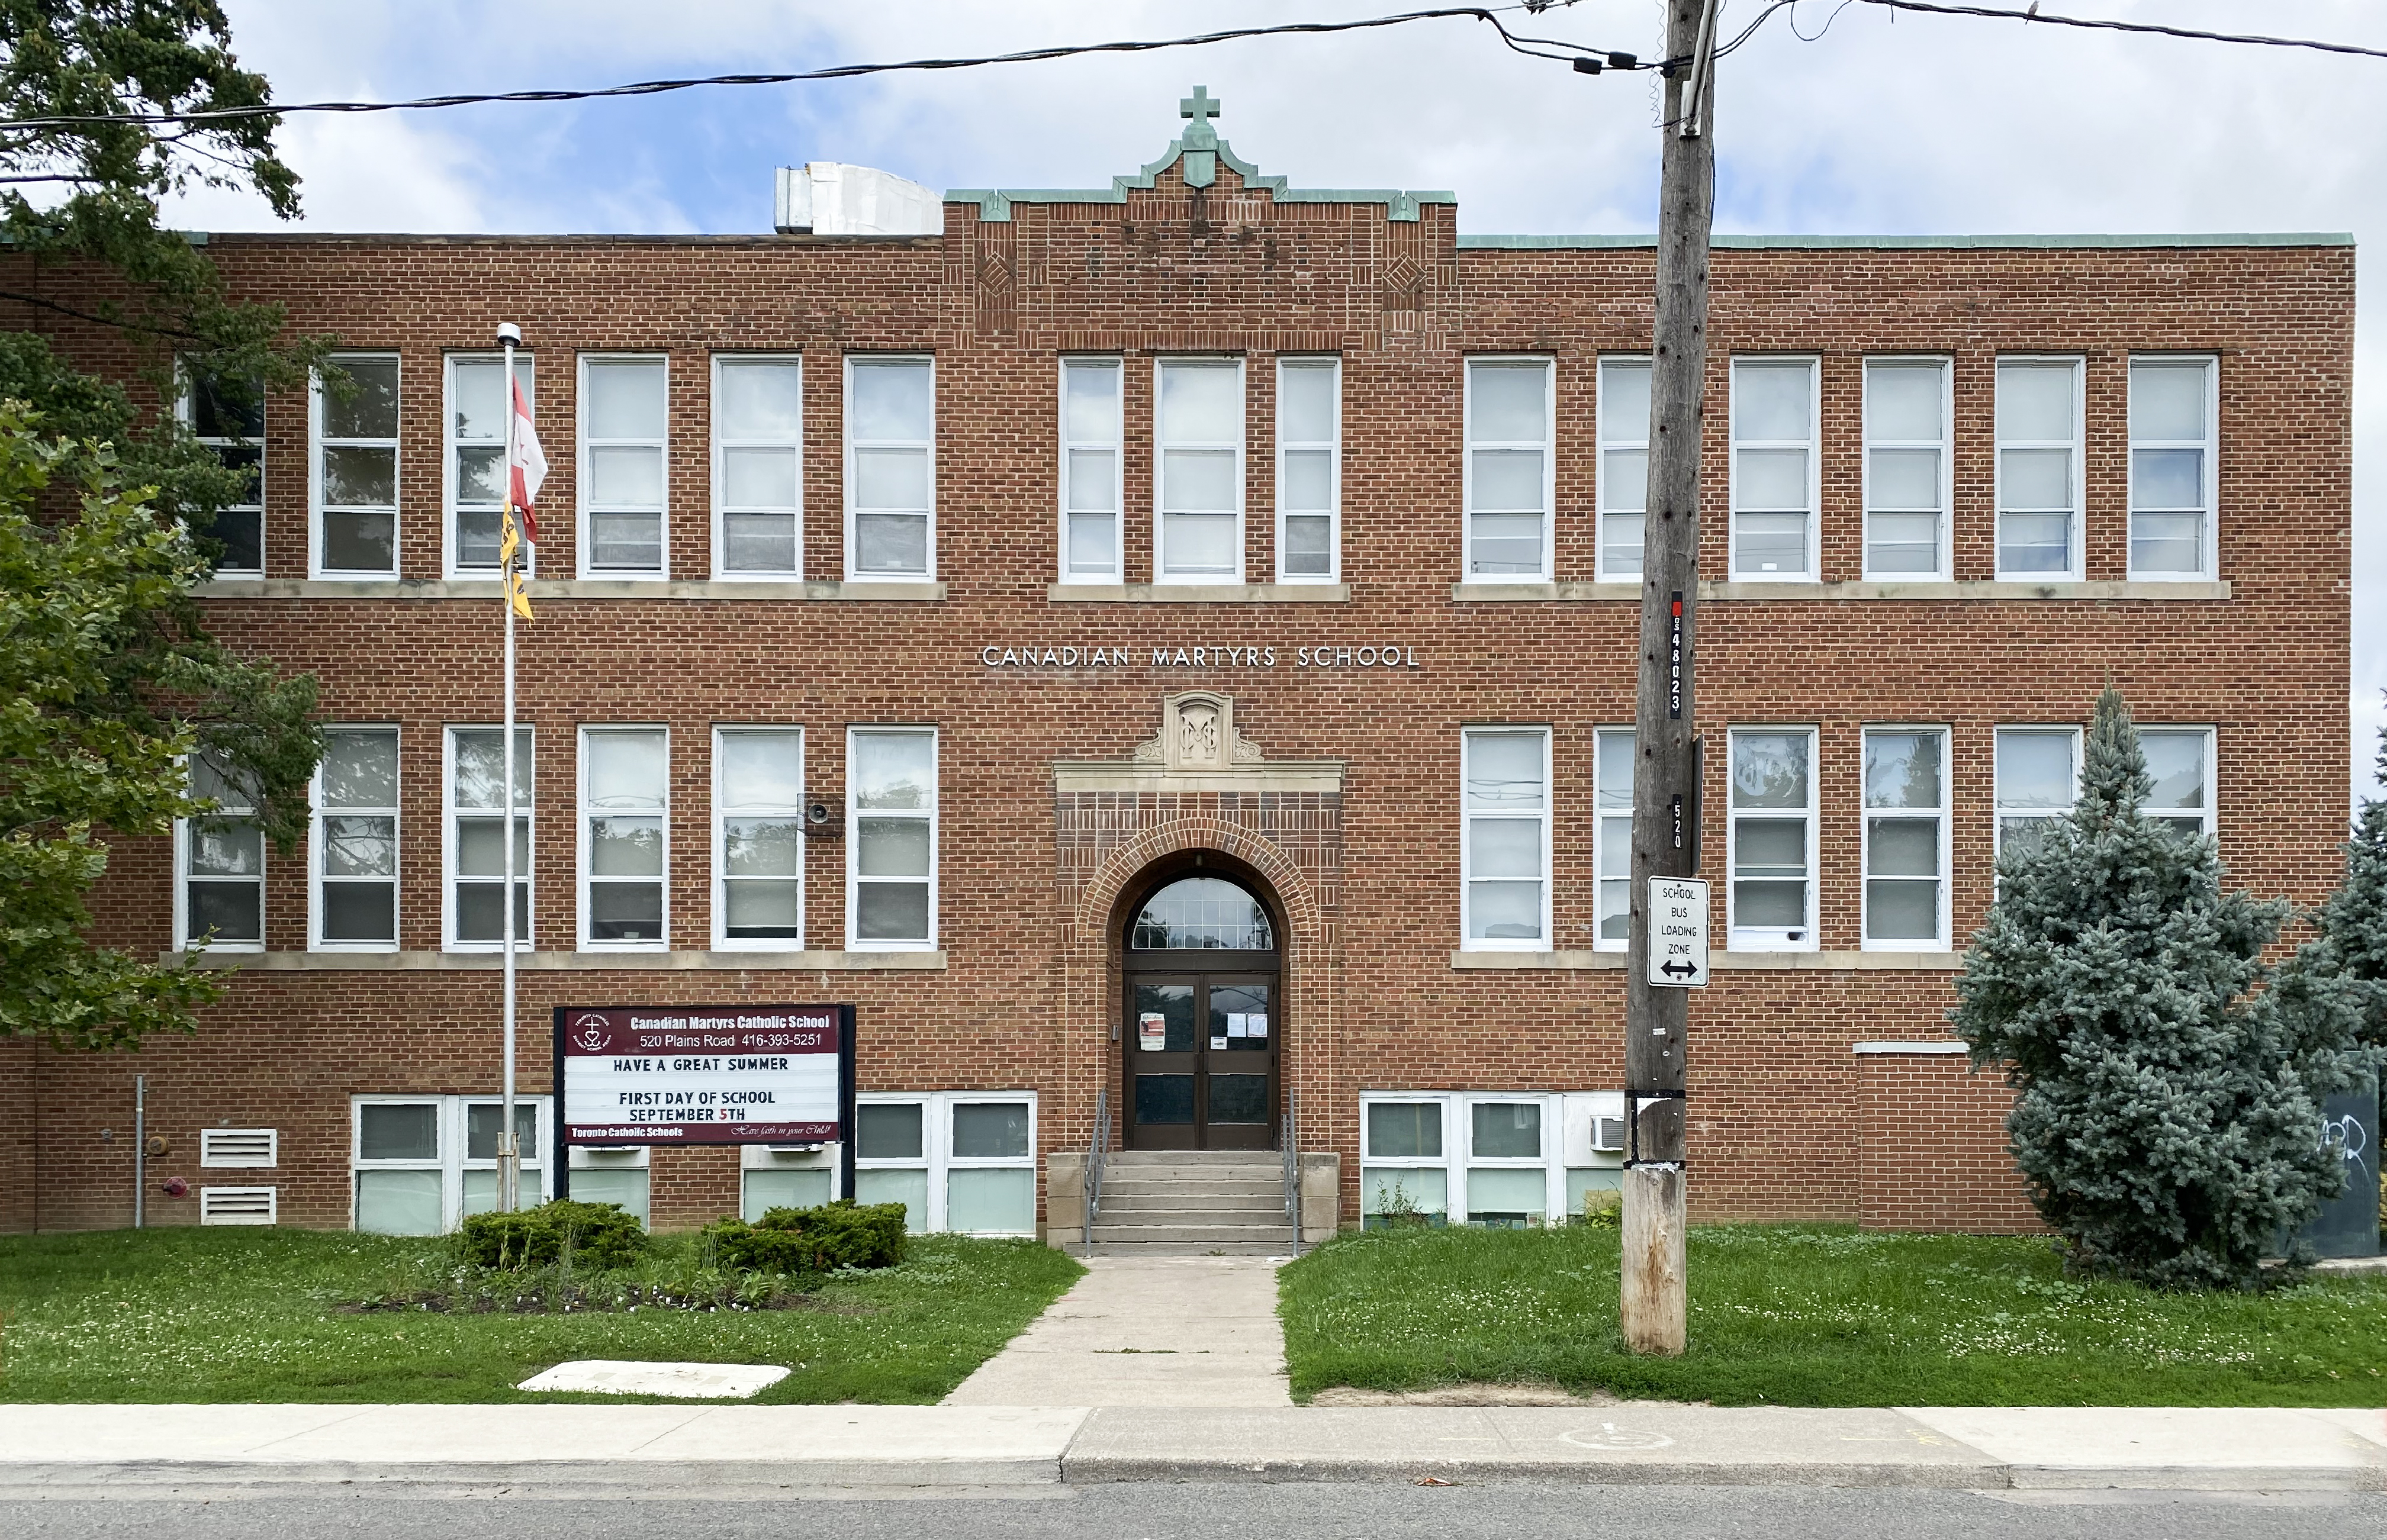 The front of the Canadian Martyrs Catholic School building